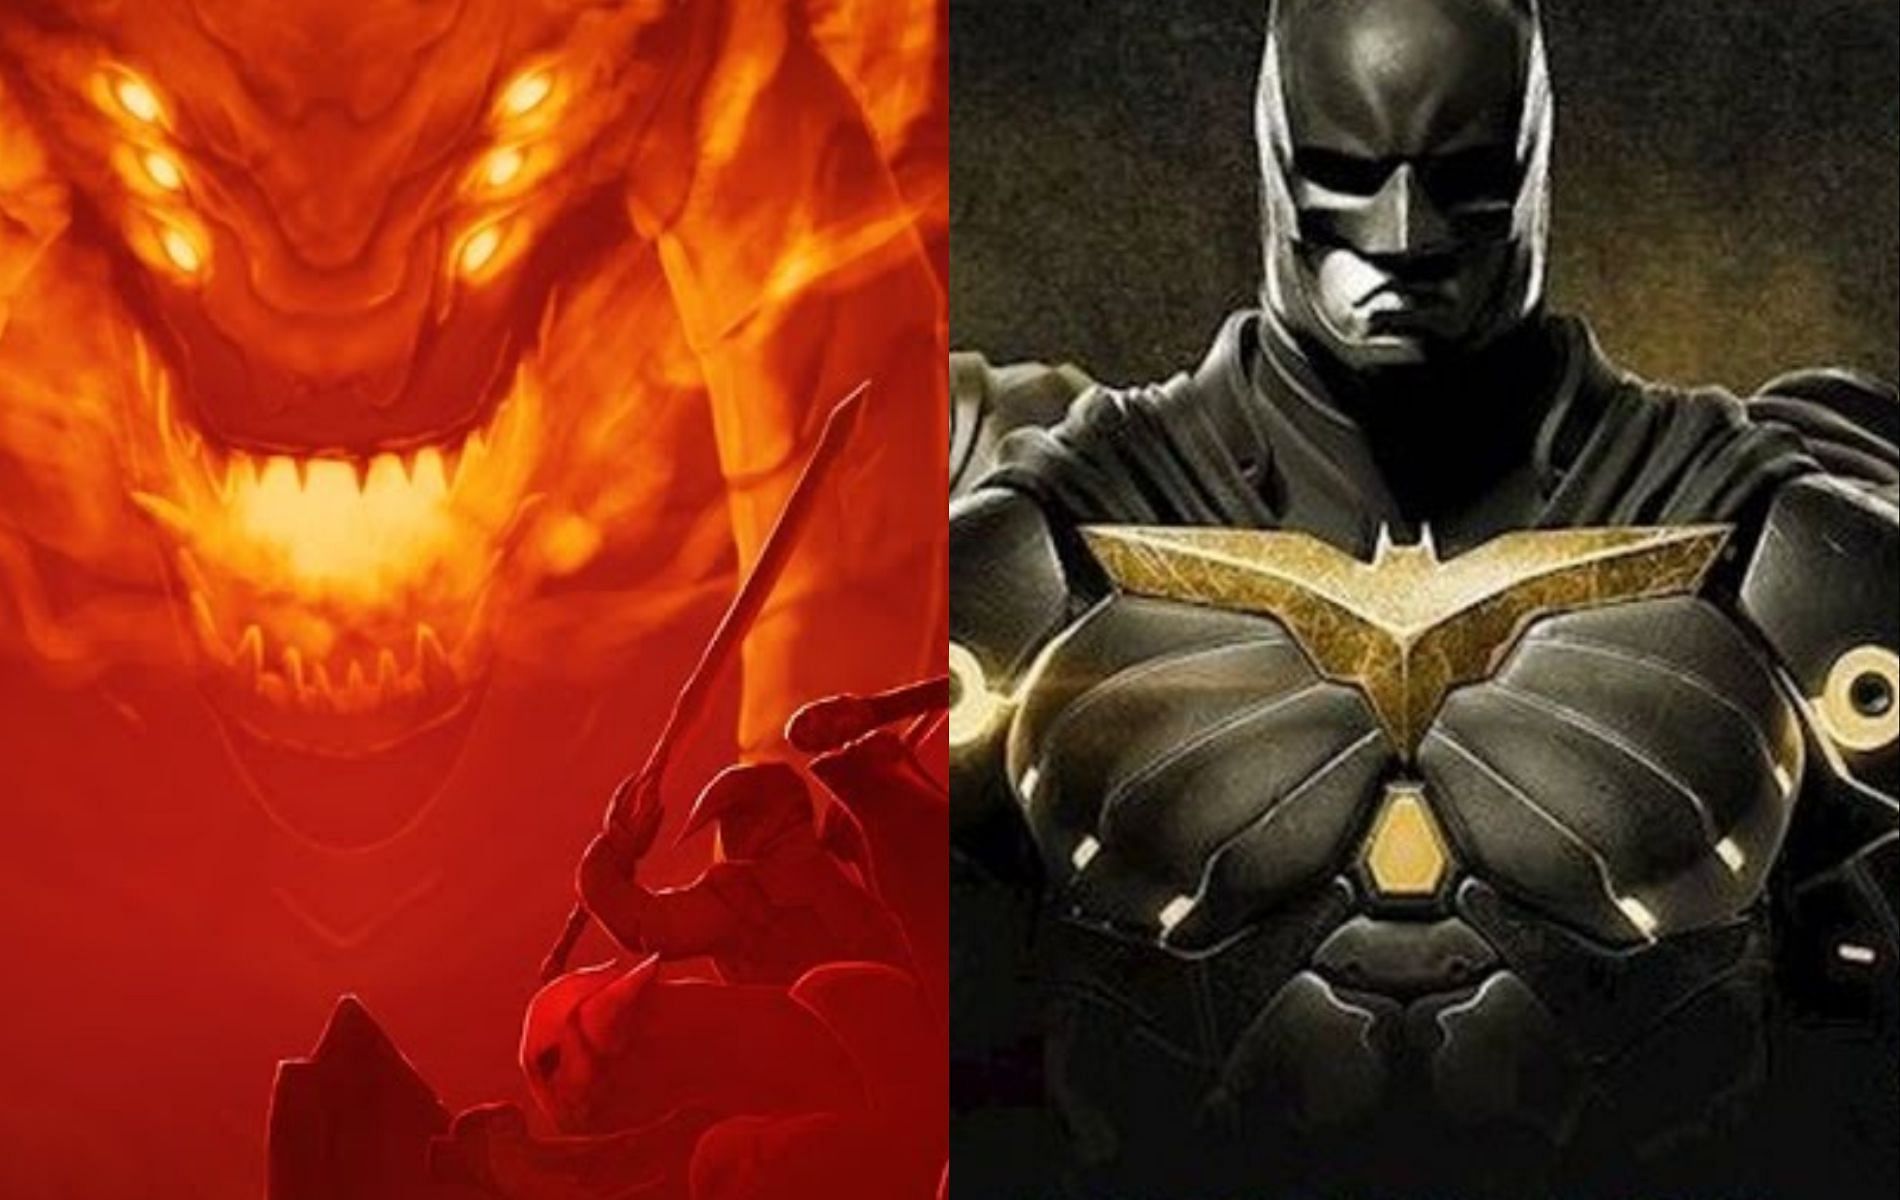 Unleash your inner fighting spirit with these top 5 mobile games (Images via Direlight/You Tube and NetherRealm Studios)